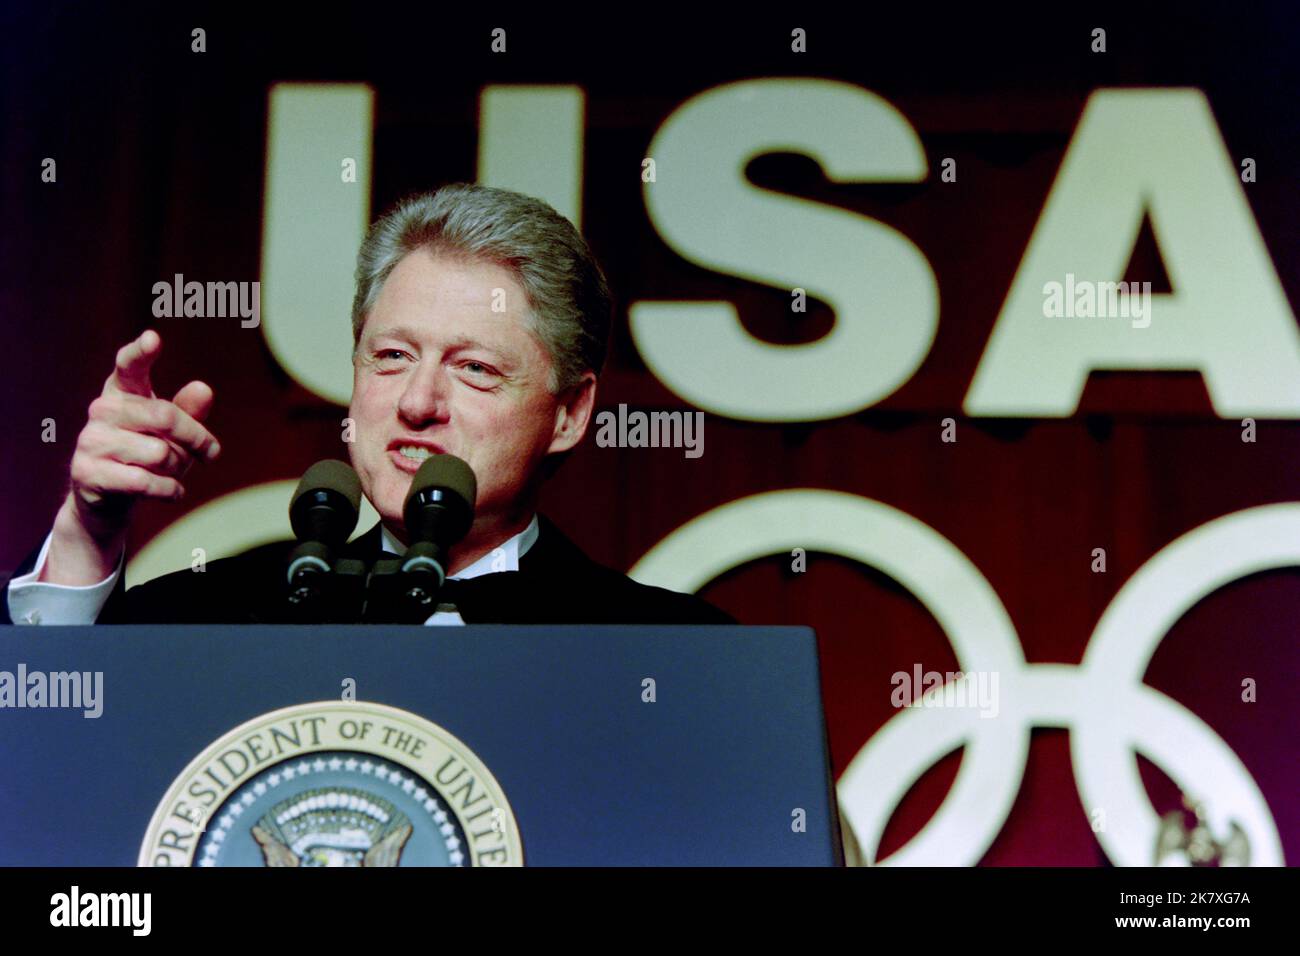 U.S. President Bill Clinton delivers remarks at the fourth annual Olympic gala dinner in support of the U.S Olympic team at the Washington Hilton Hotel, May 1, 1996 in Washington, D.C. The centennial Olympic games will be held in Atlanta in August. Stock Photo